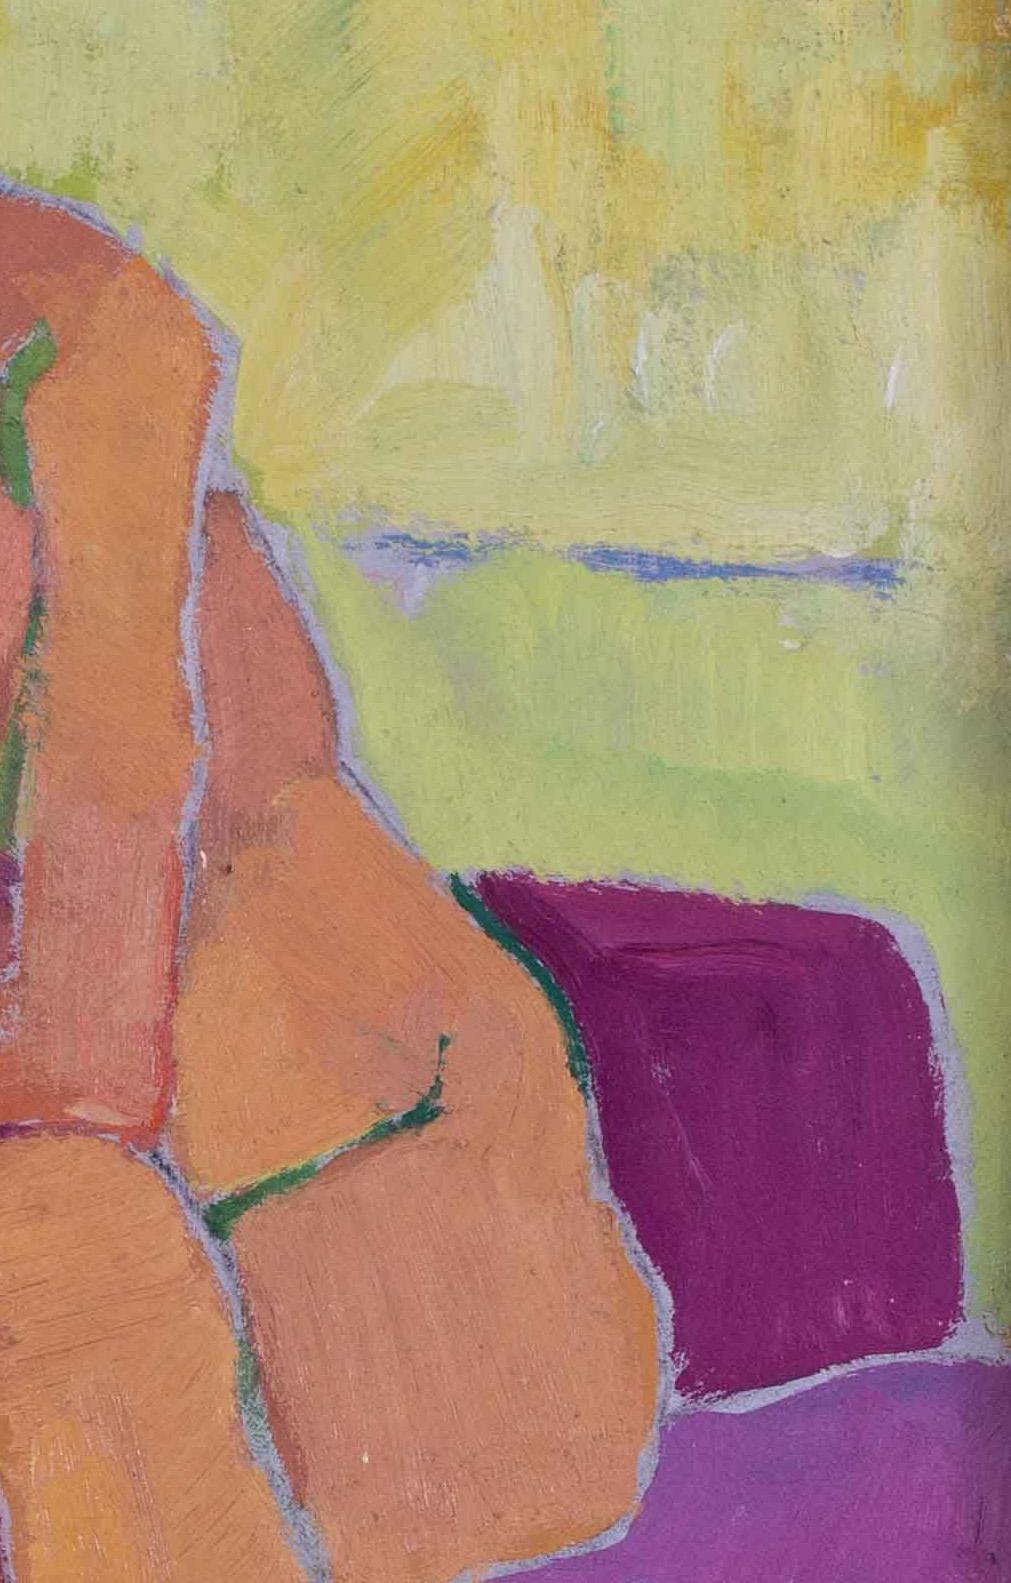 A very striking original Post-Impressionist oil painting of a seated nude by French artist Jean Dulac. The bold, broad brushstrokes contribute to the excitement of the piece, while the juxtaposition of strong pink and purple sofa creates a